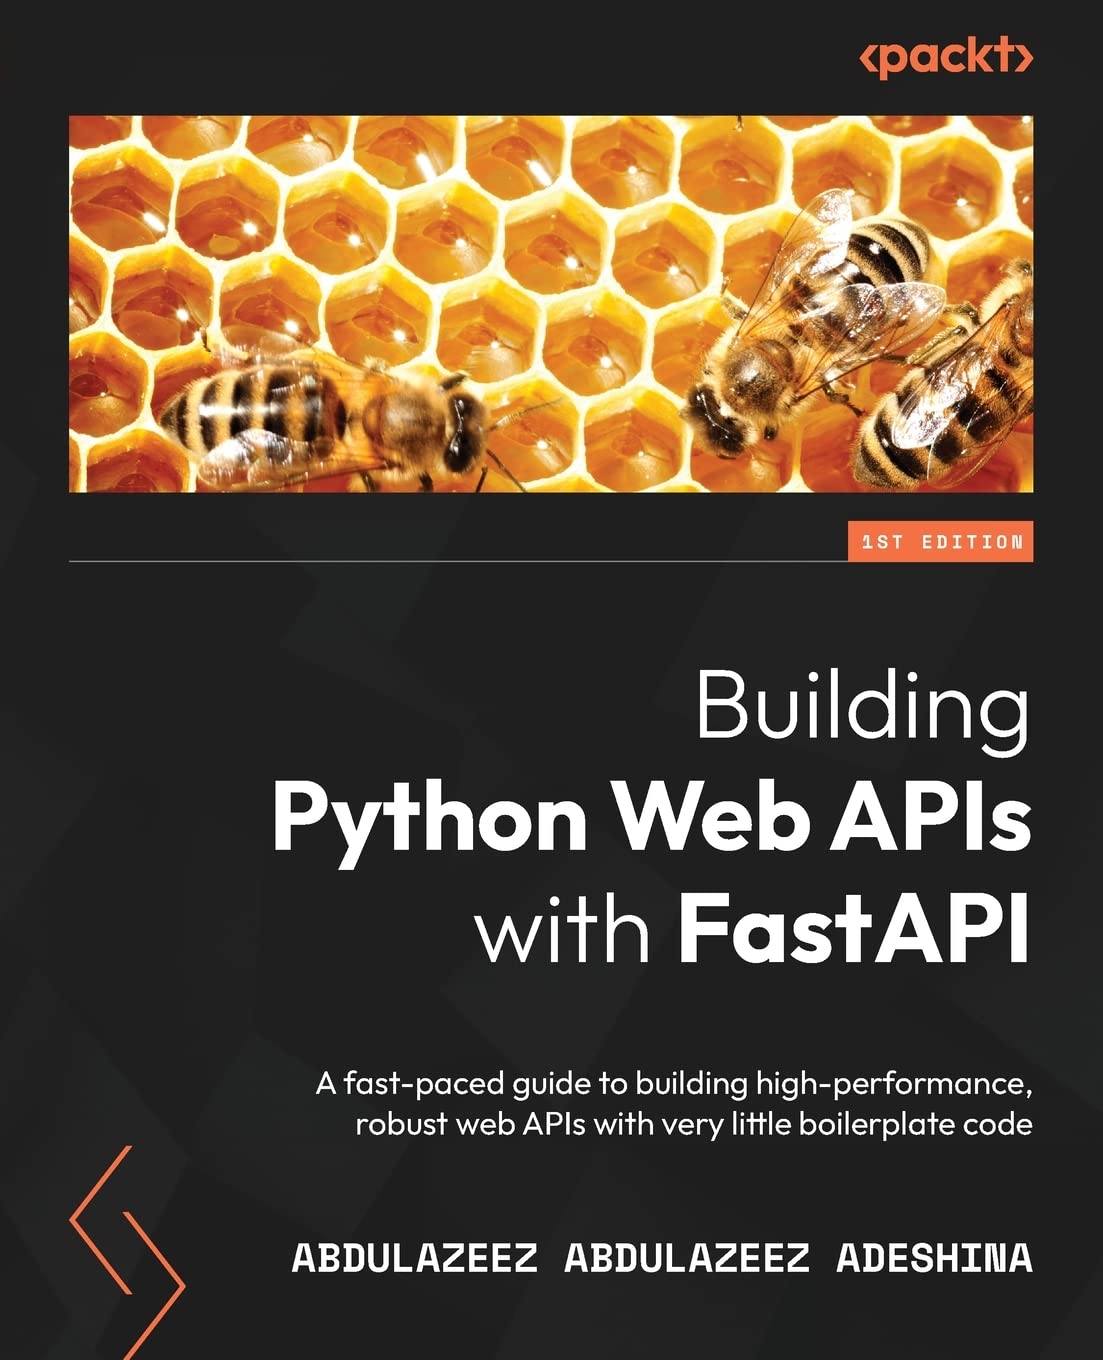 Building Python Web APIs with FastAPI: A fast-paced guide to building high-performance, robust web APIs with very little boilerplate code by  Abdulazeez Abdulazeez Adeshina